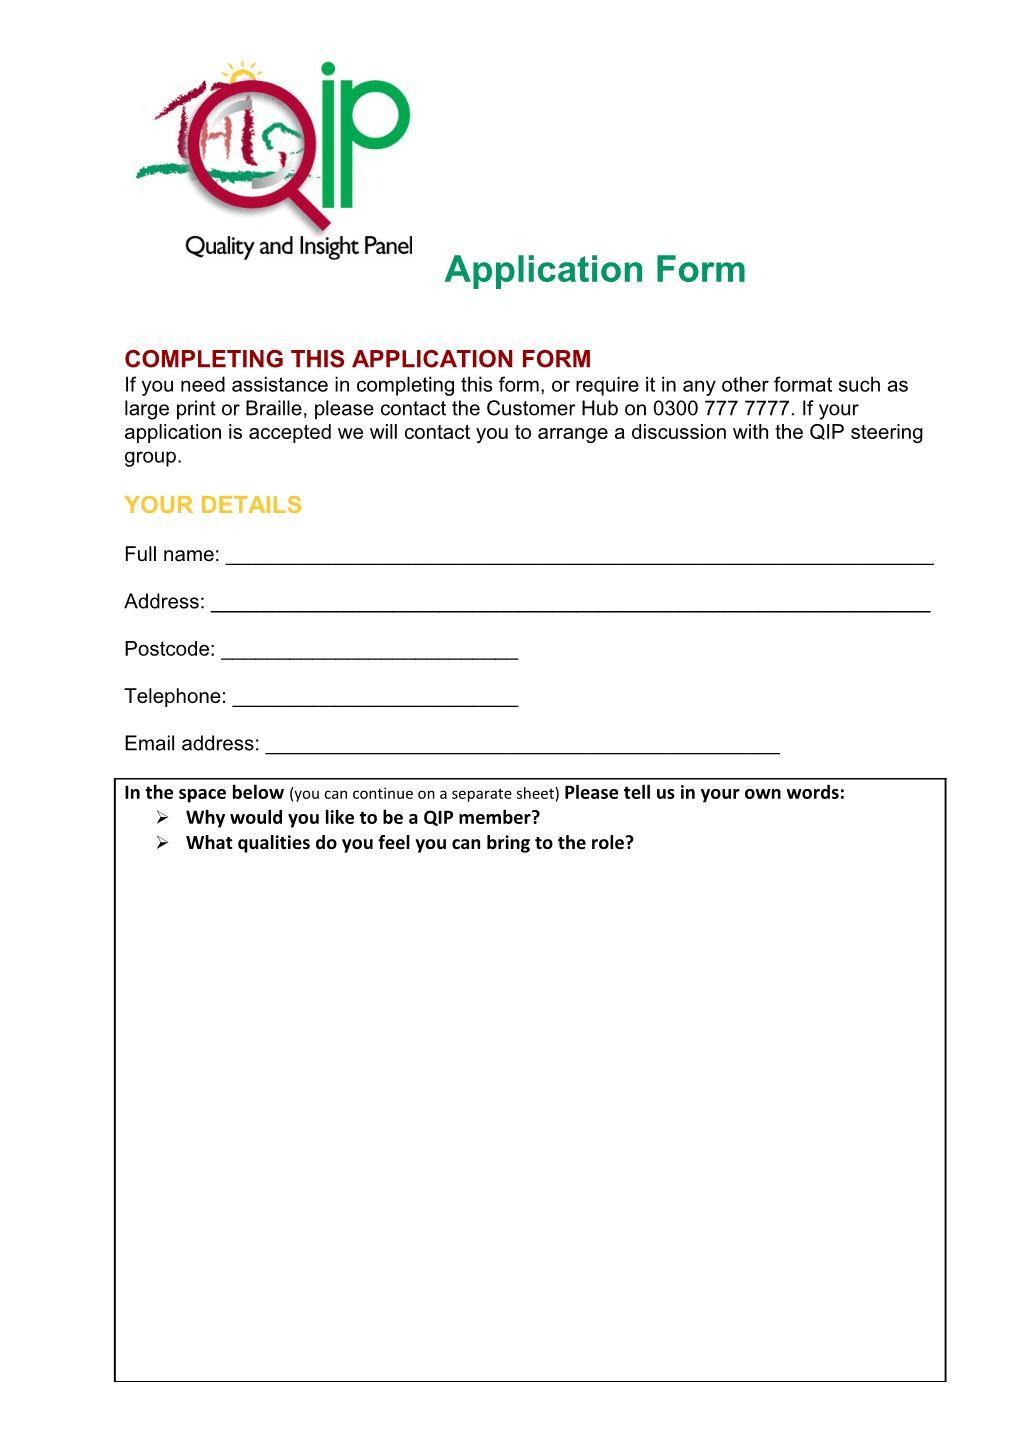 Completing This Application Form